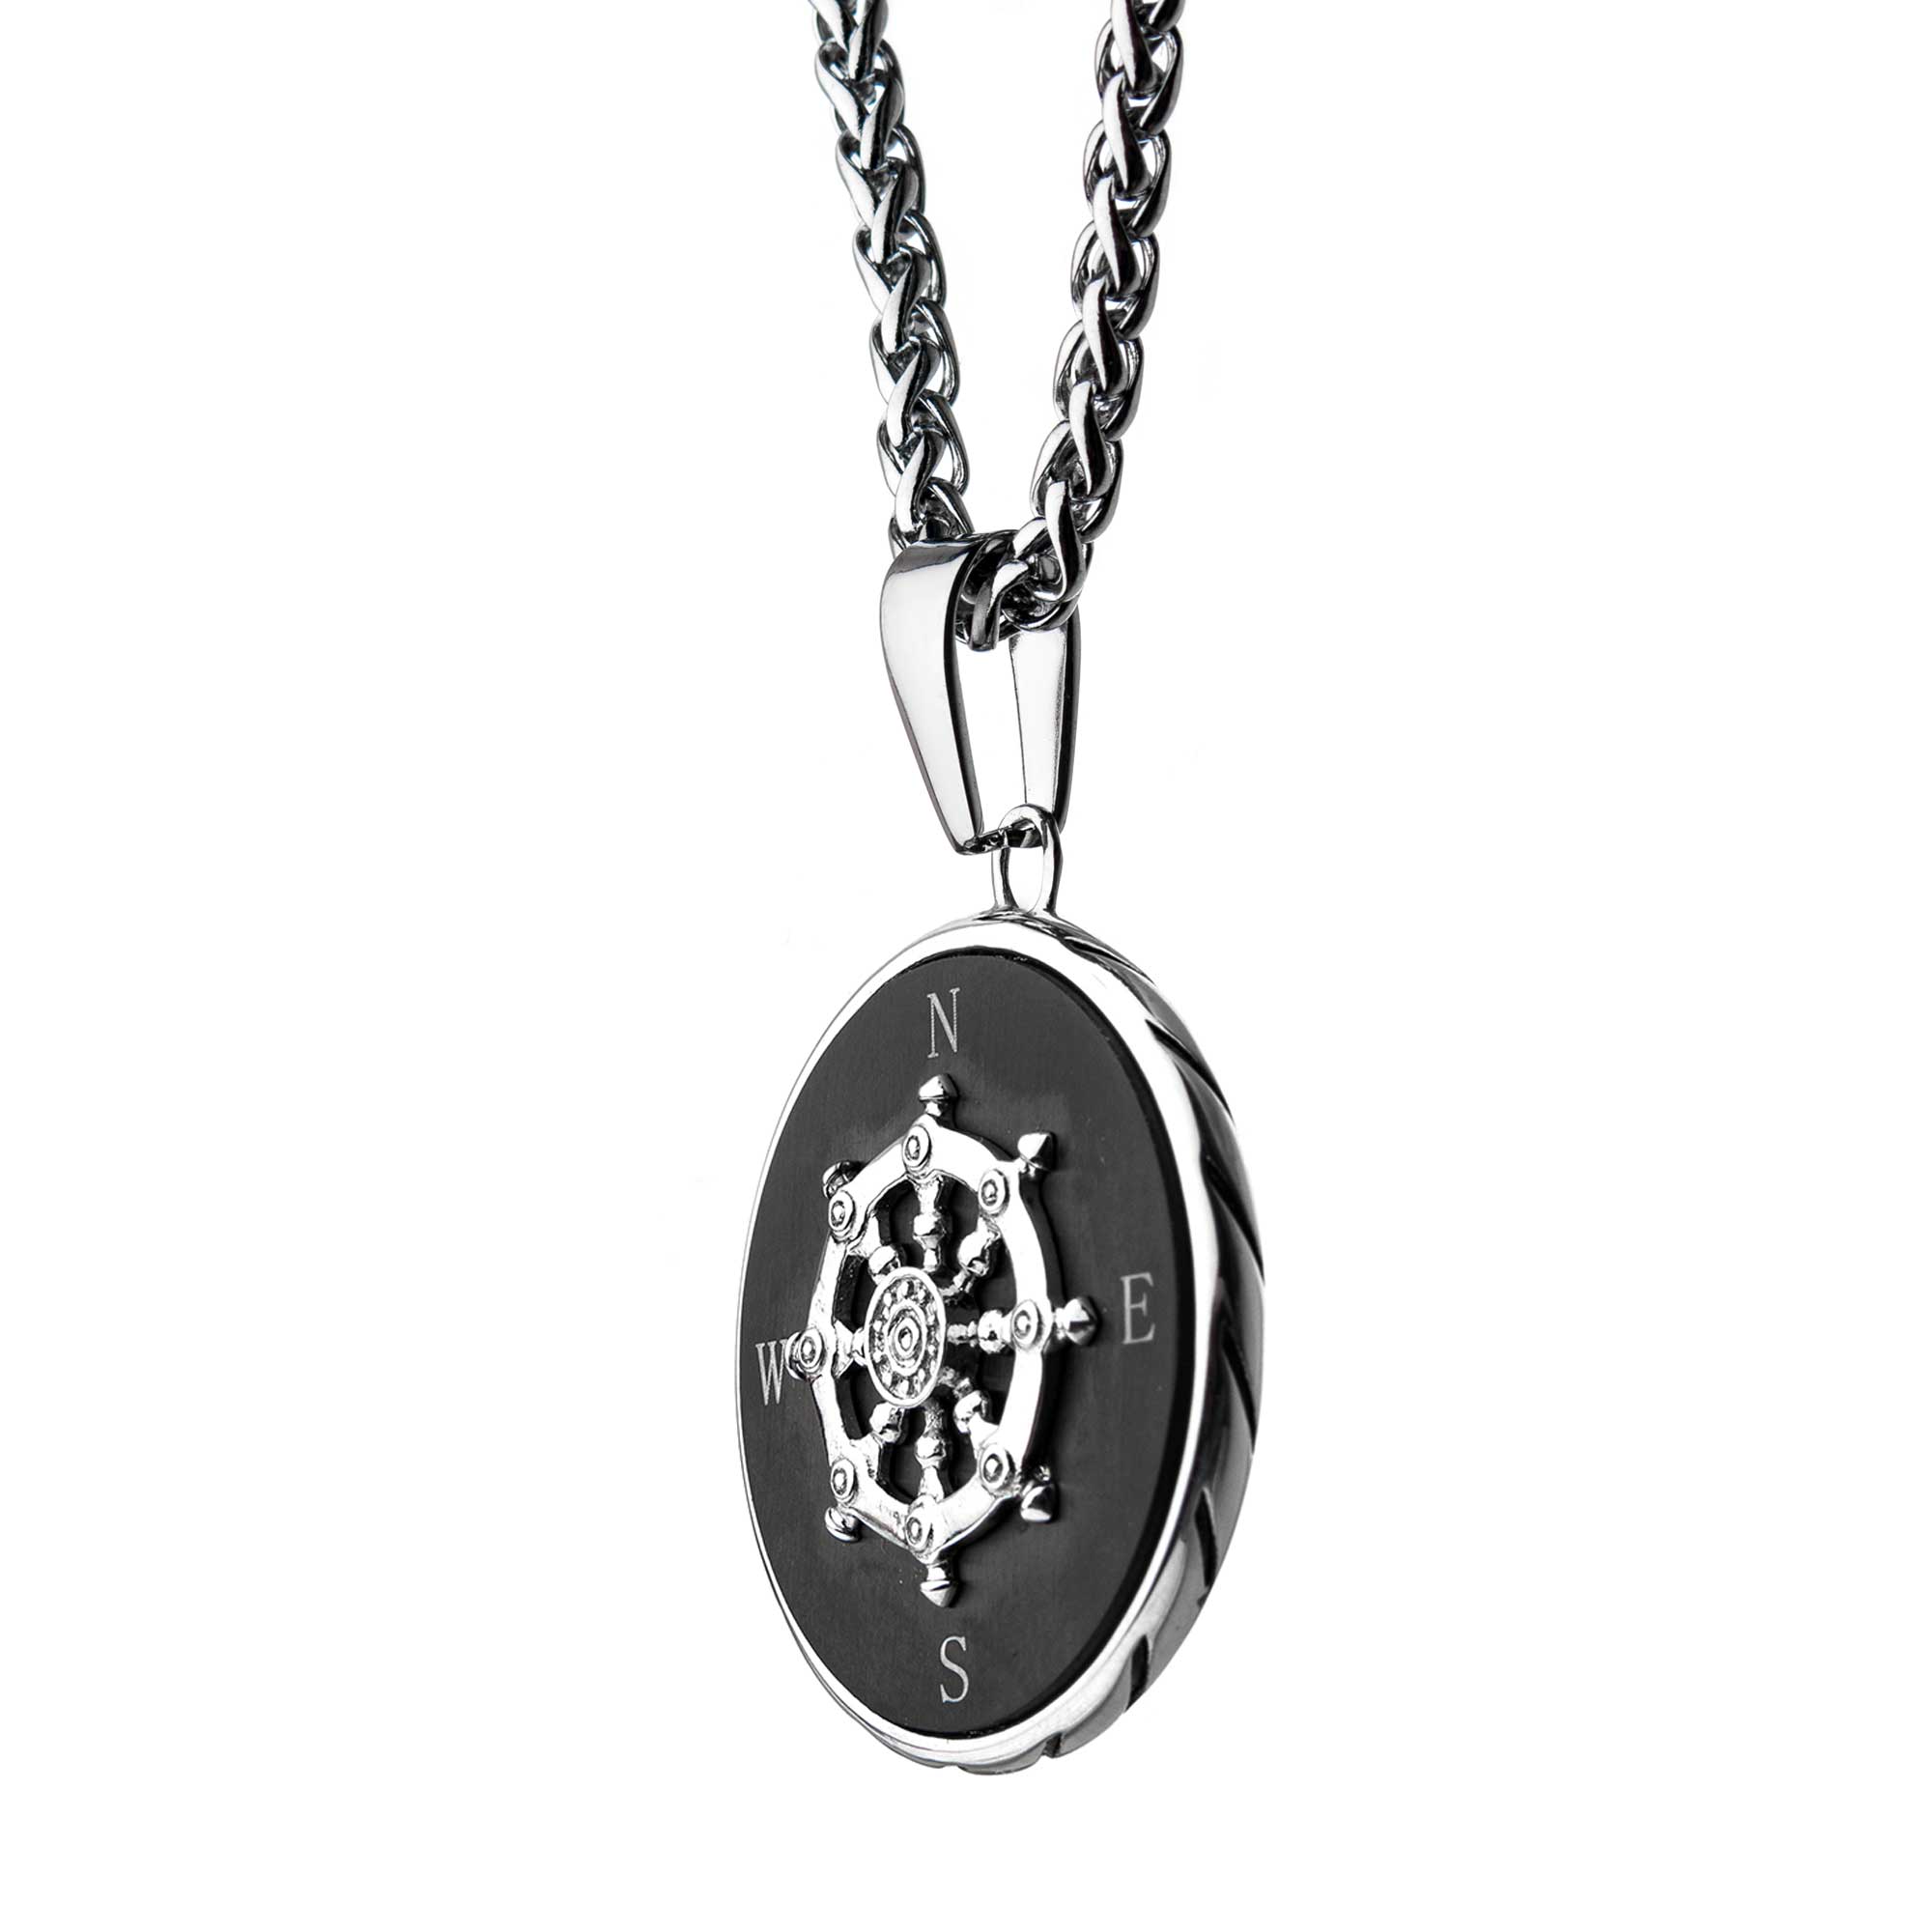 Stainless Steel Black Plated Ship's Wheel Compass Pendant with Chain Image 3 Lewis Jewelers, Inc. Ansonia, CT